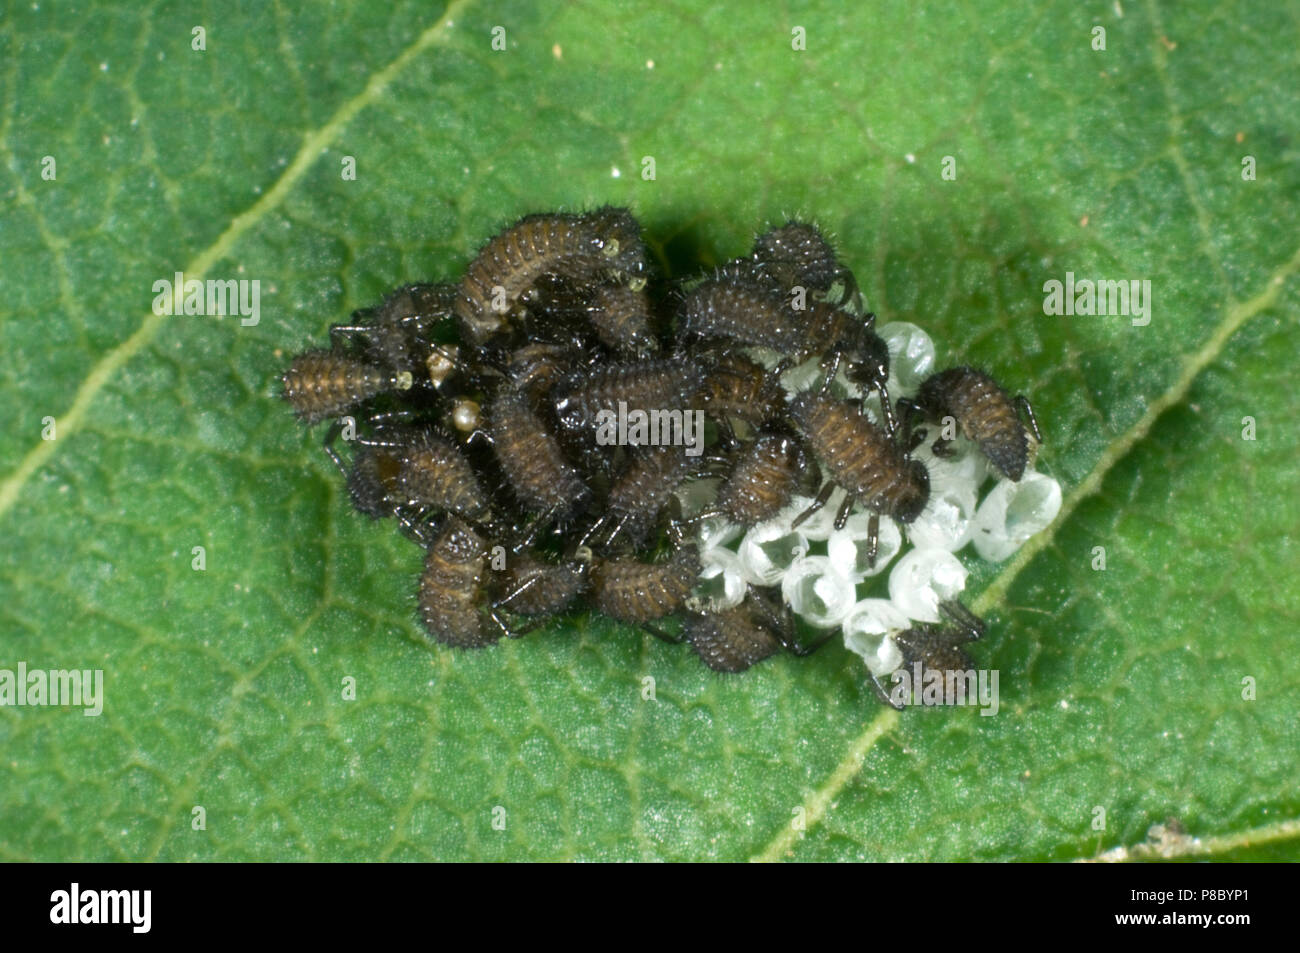 Newly hatched harlequin ladybird, Harmonia axyridis, larvae still with a raft of empty egg cases, June Stock Photo